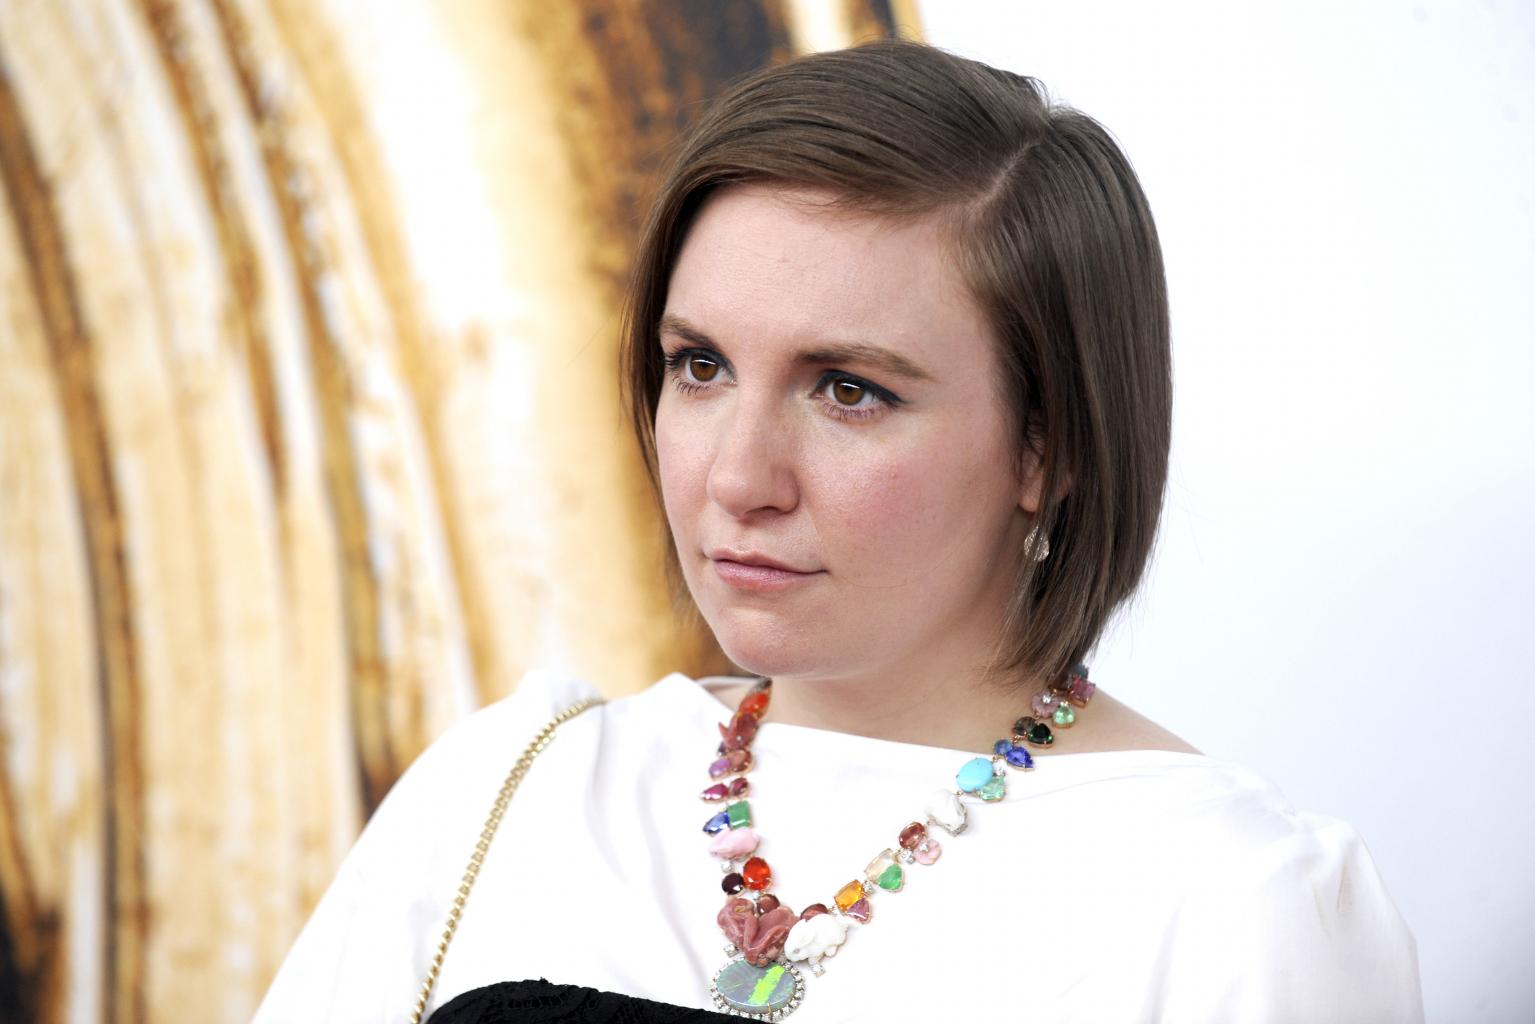        Girls      '  Producer Details How Lena Dunham Encountered        Hideous      '  And        Inappropriate      '  Behaviour From A TV Producer